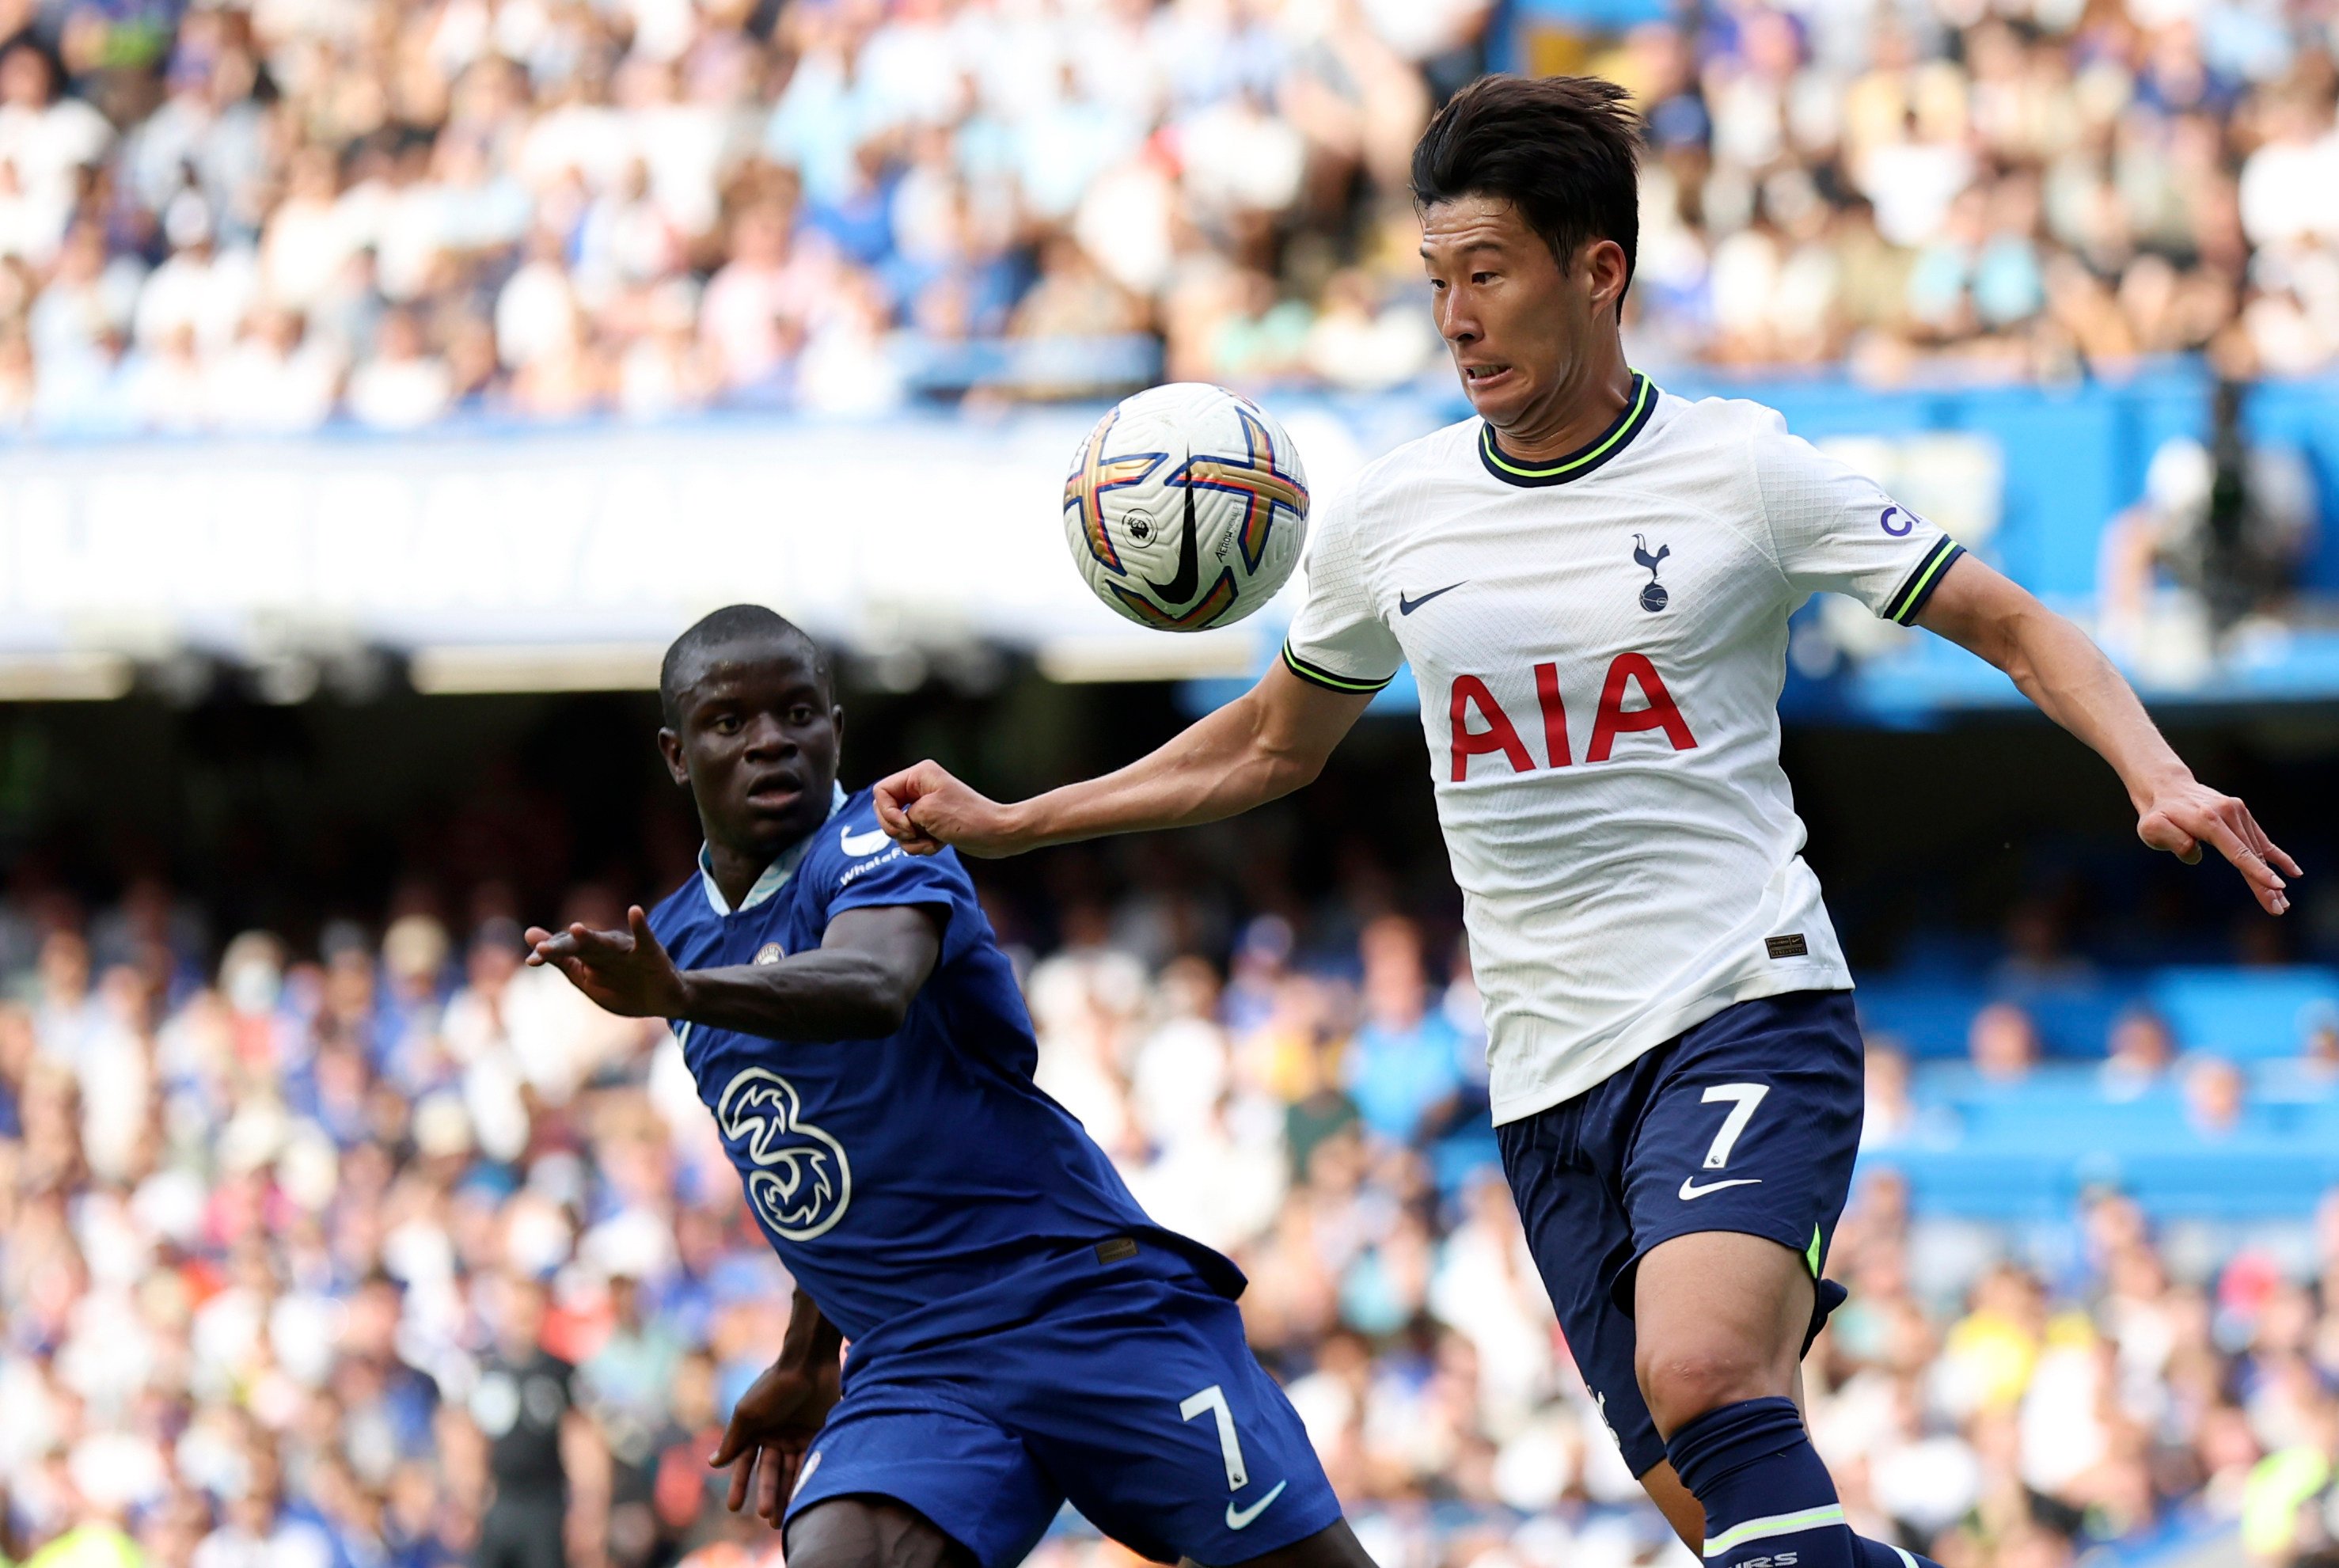 Tottenham’s Son Heung-min (right) duels for the ball with Chelsea’s N’Golo Kante. Photo: AP